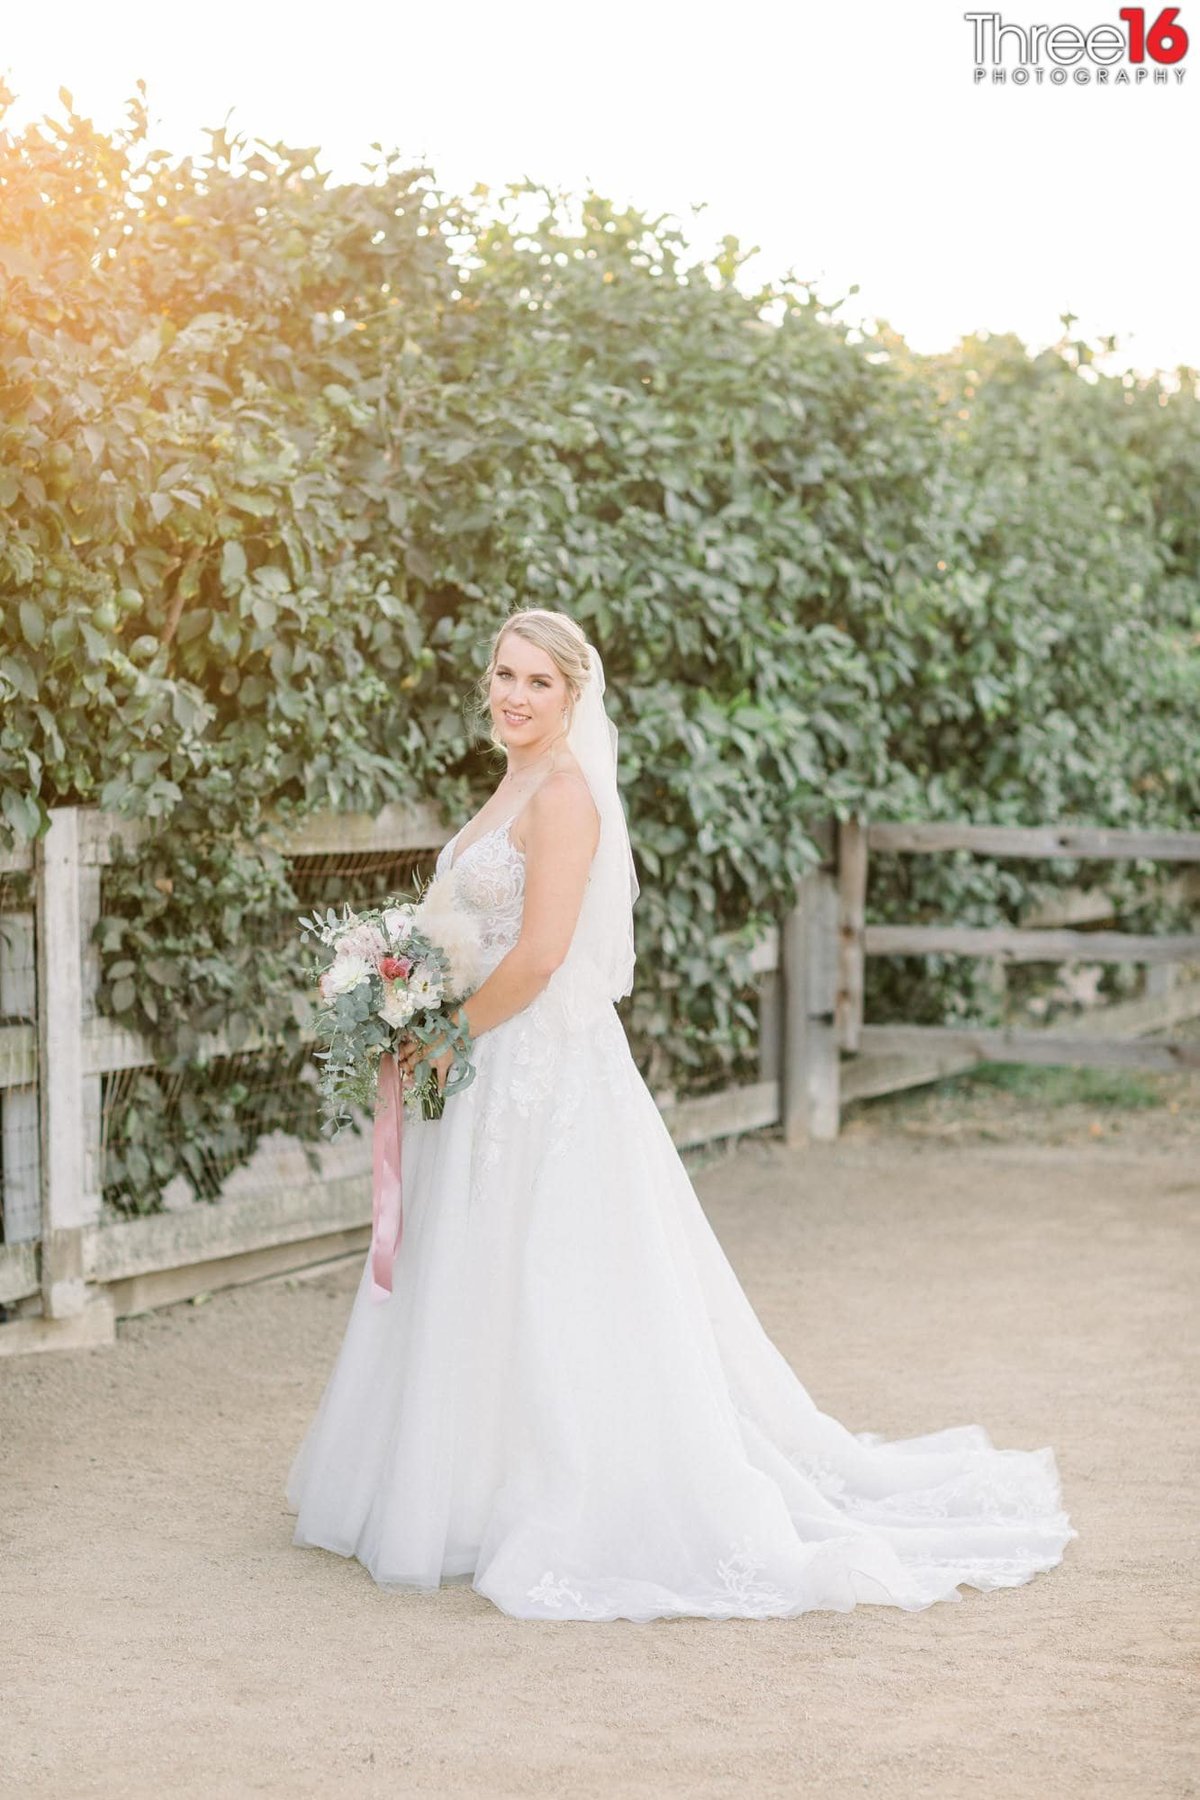 Bride poses with with her bouquet and dress train fanned out in front of a ranch-style fence